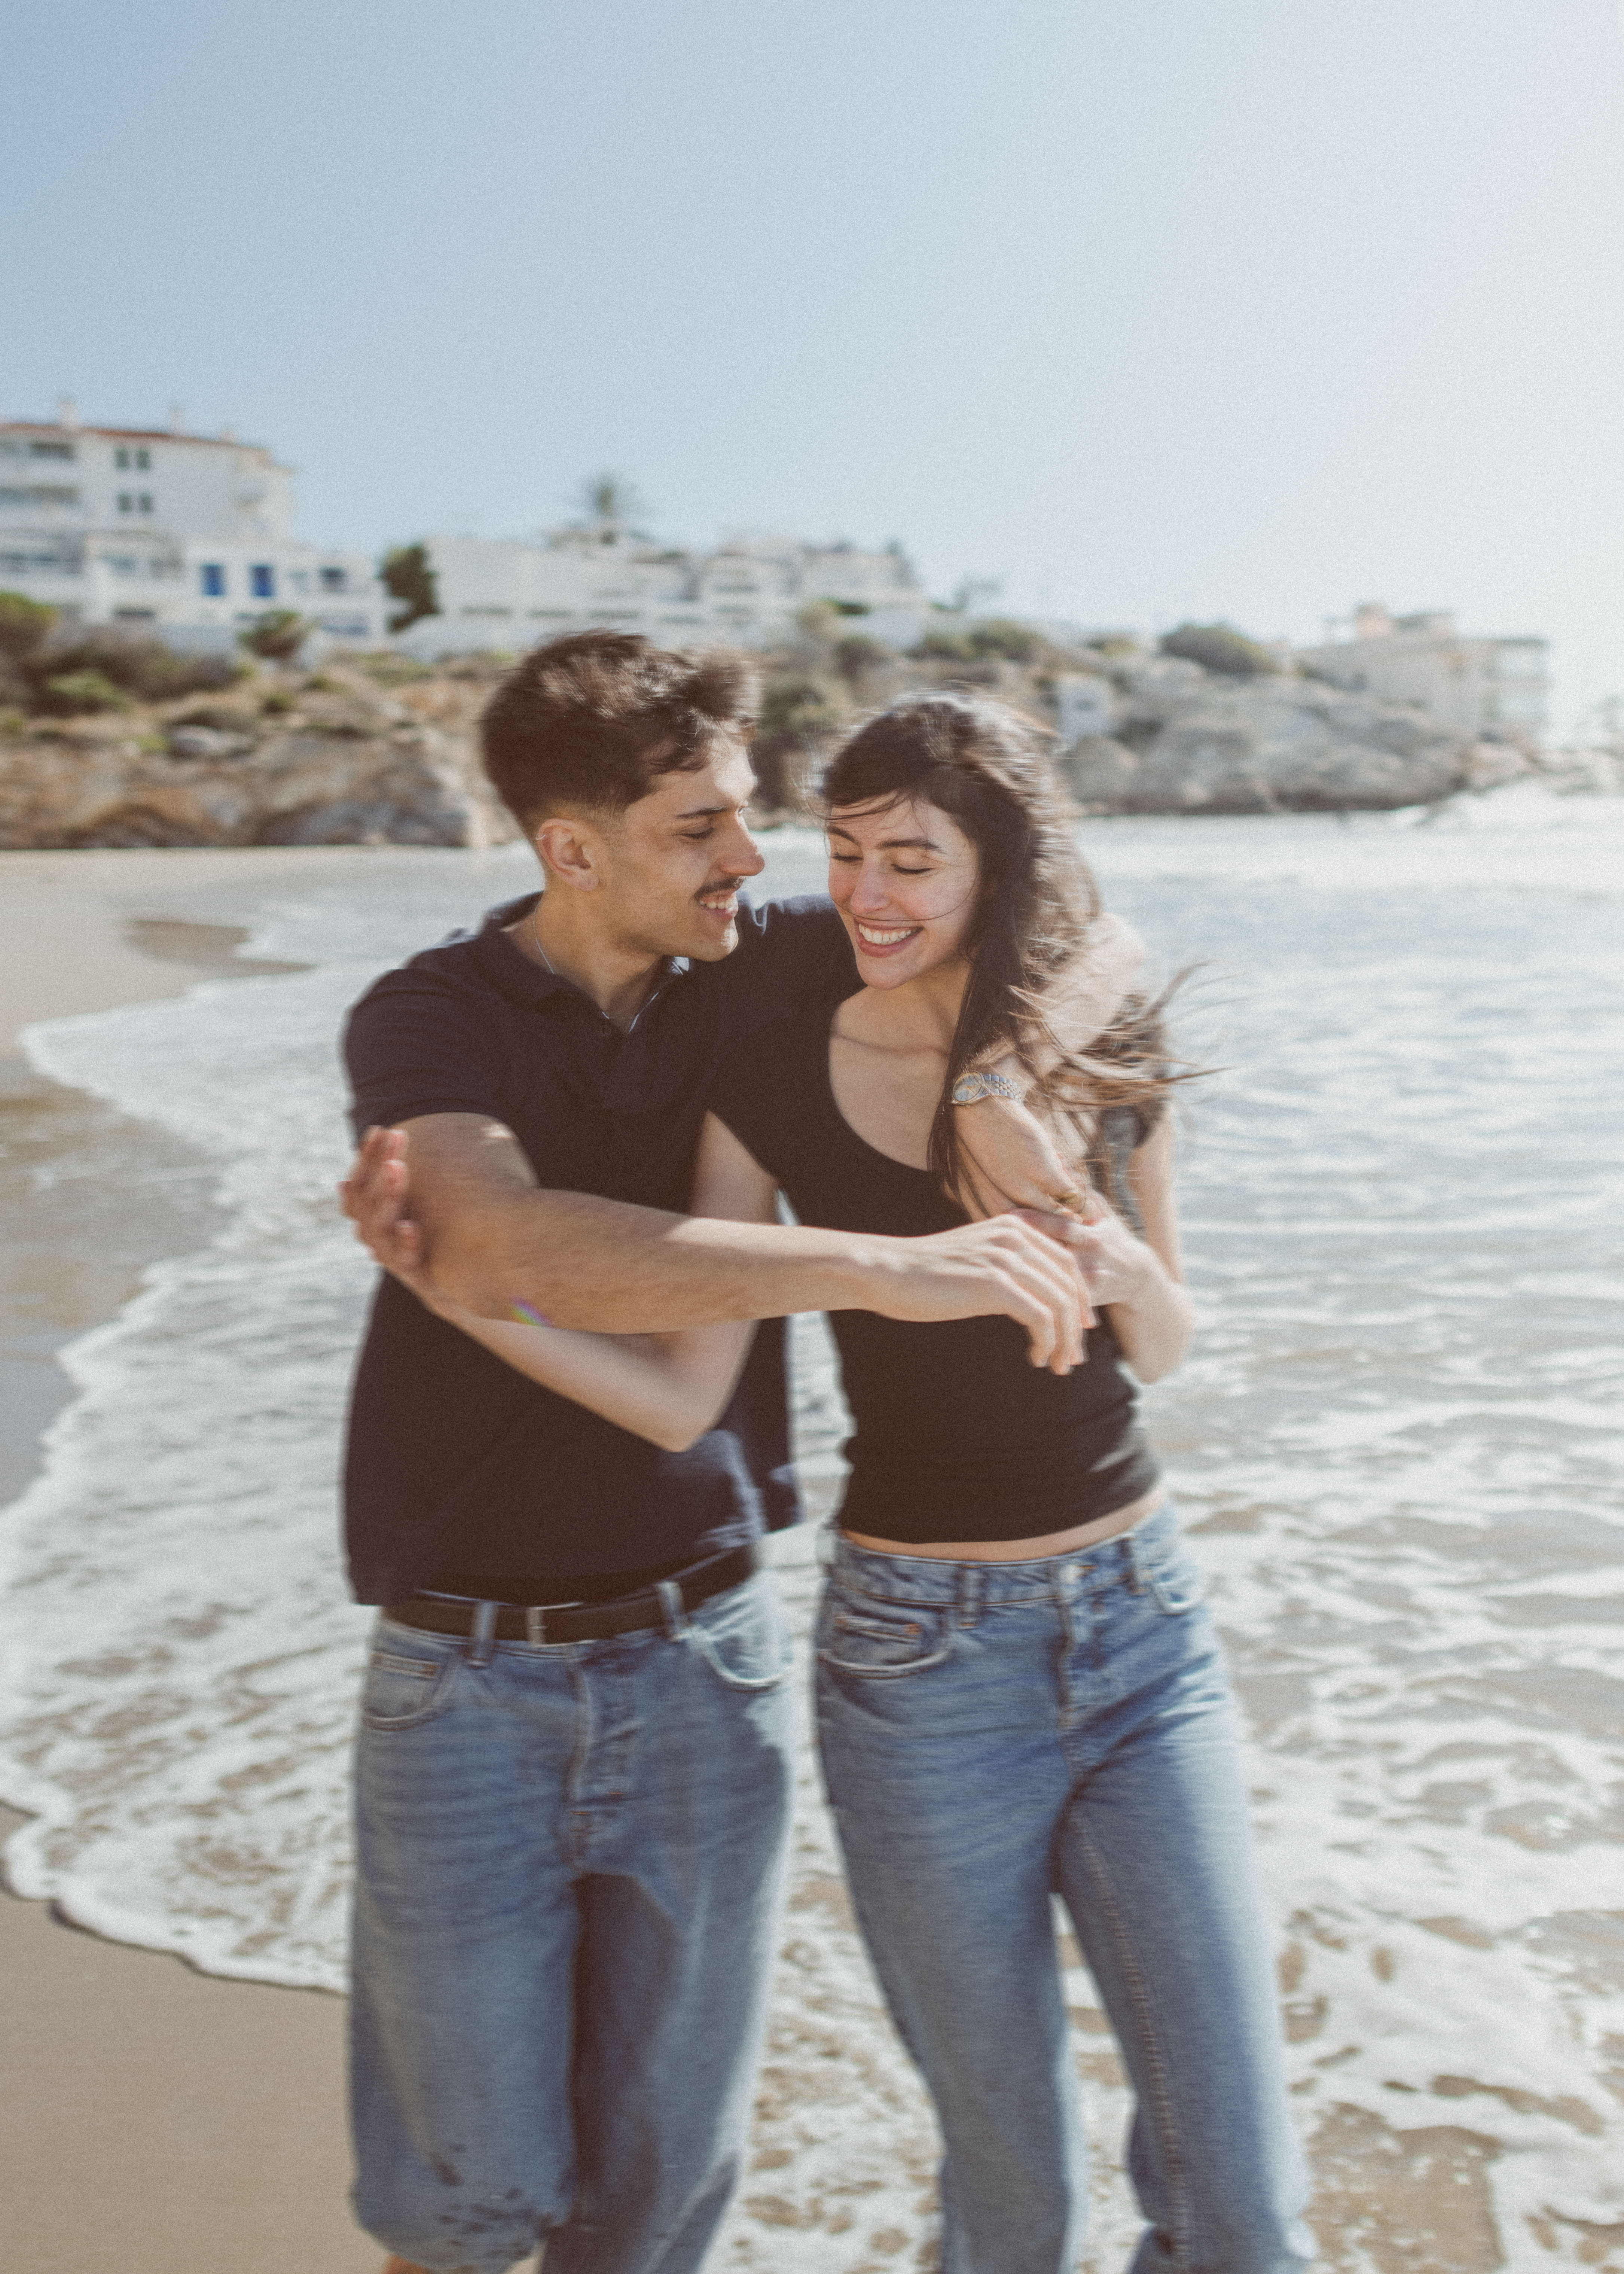 Beachside Wanderlust: Creative Couple Photography in Sitges